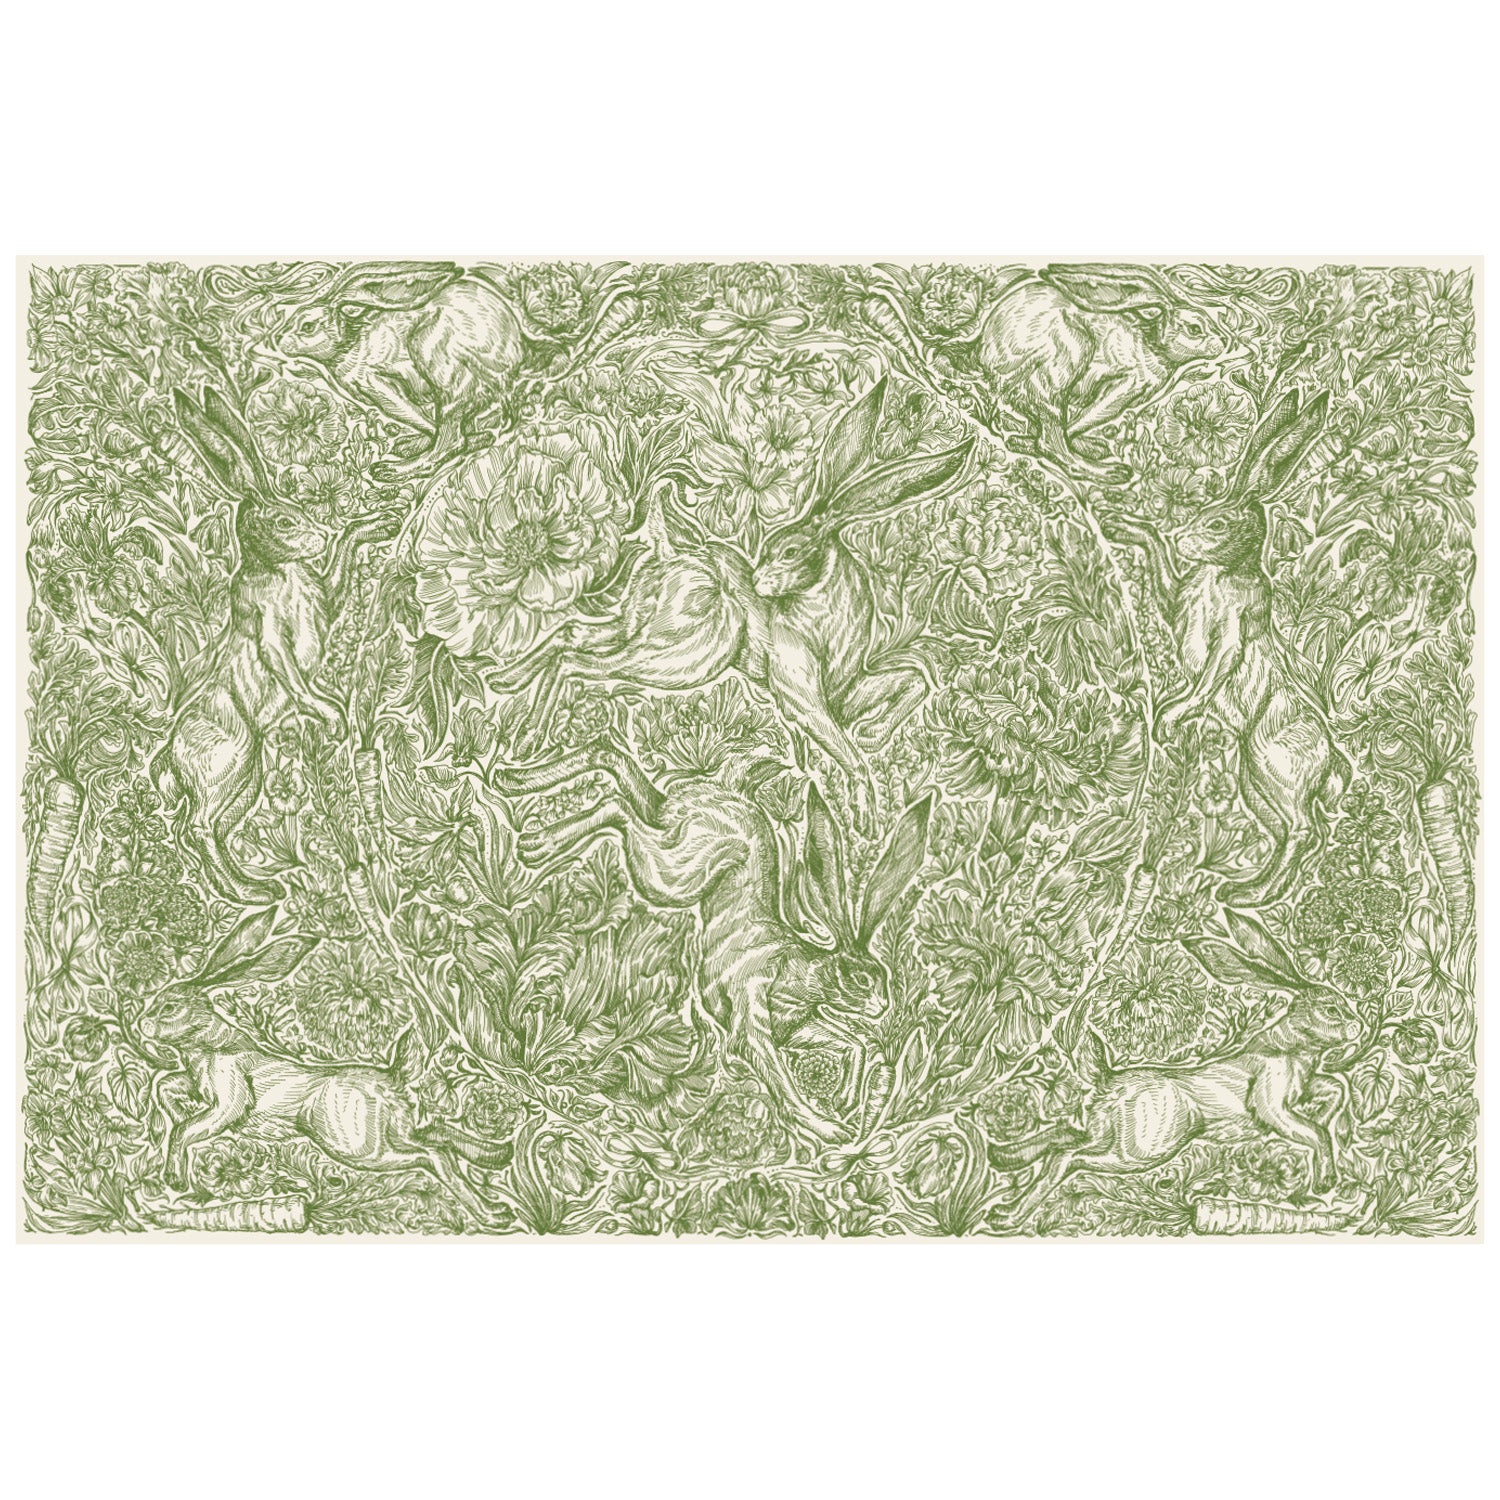 A green and white Hare Promenade Placemat by Hester &amp; Cook depicting an oversized floral design in a magical garden.